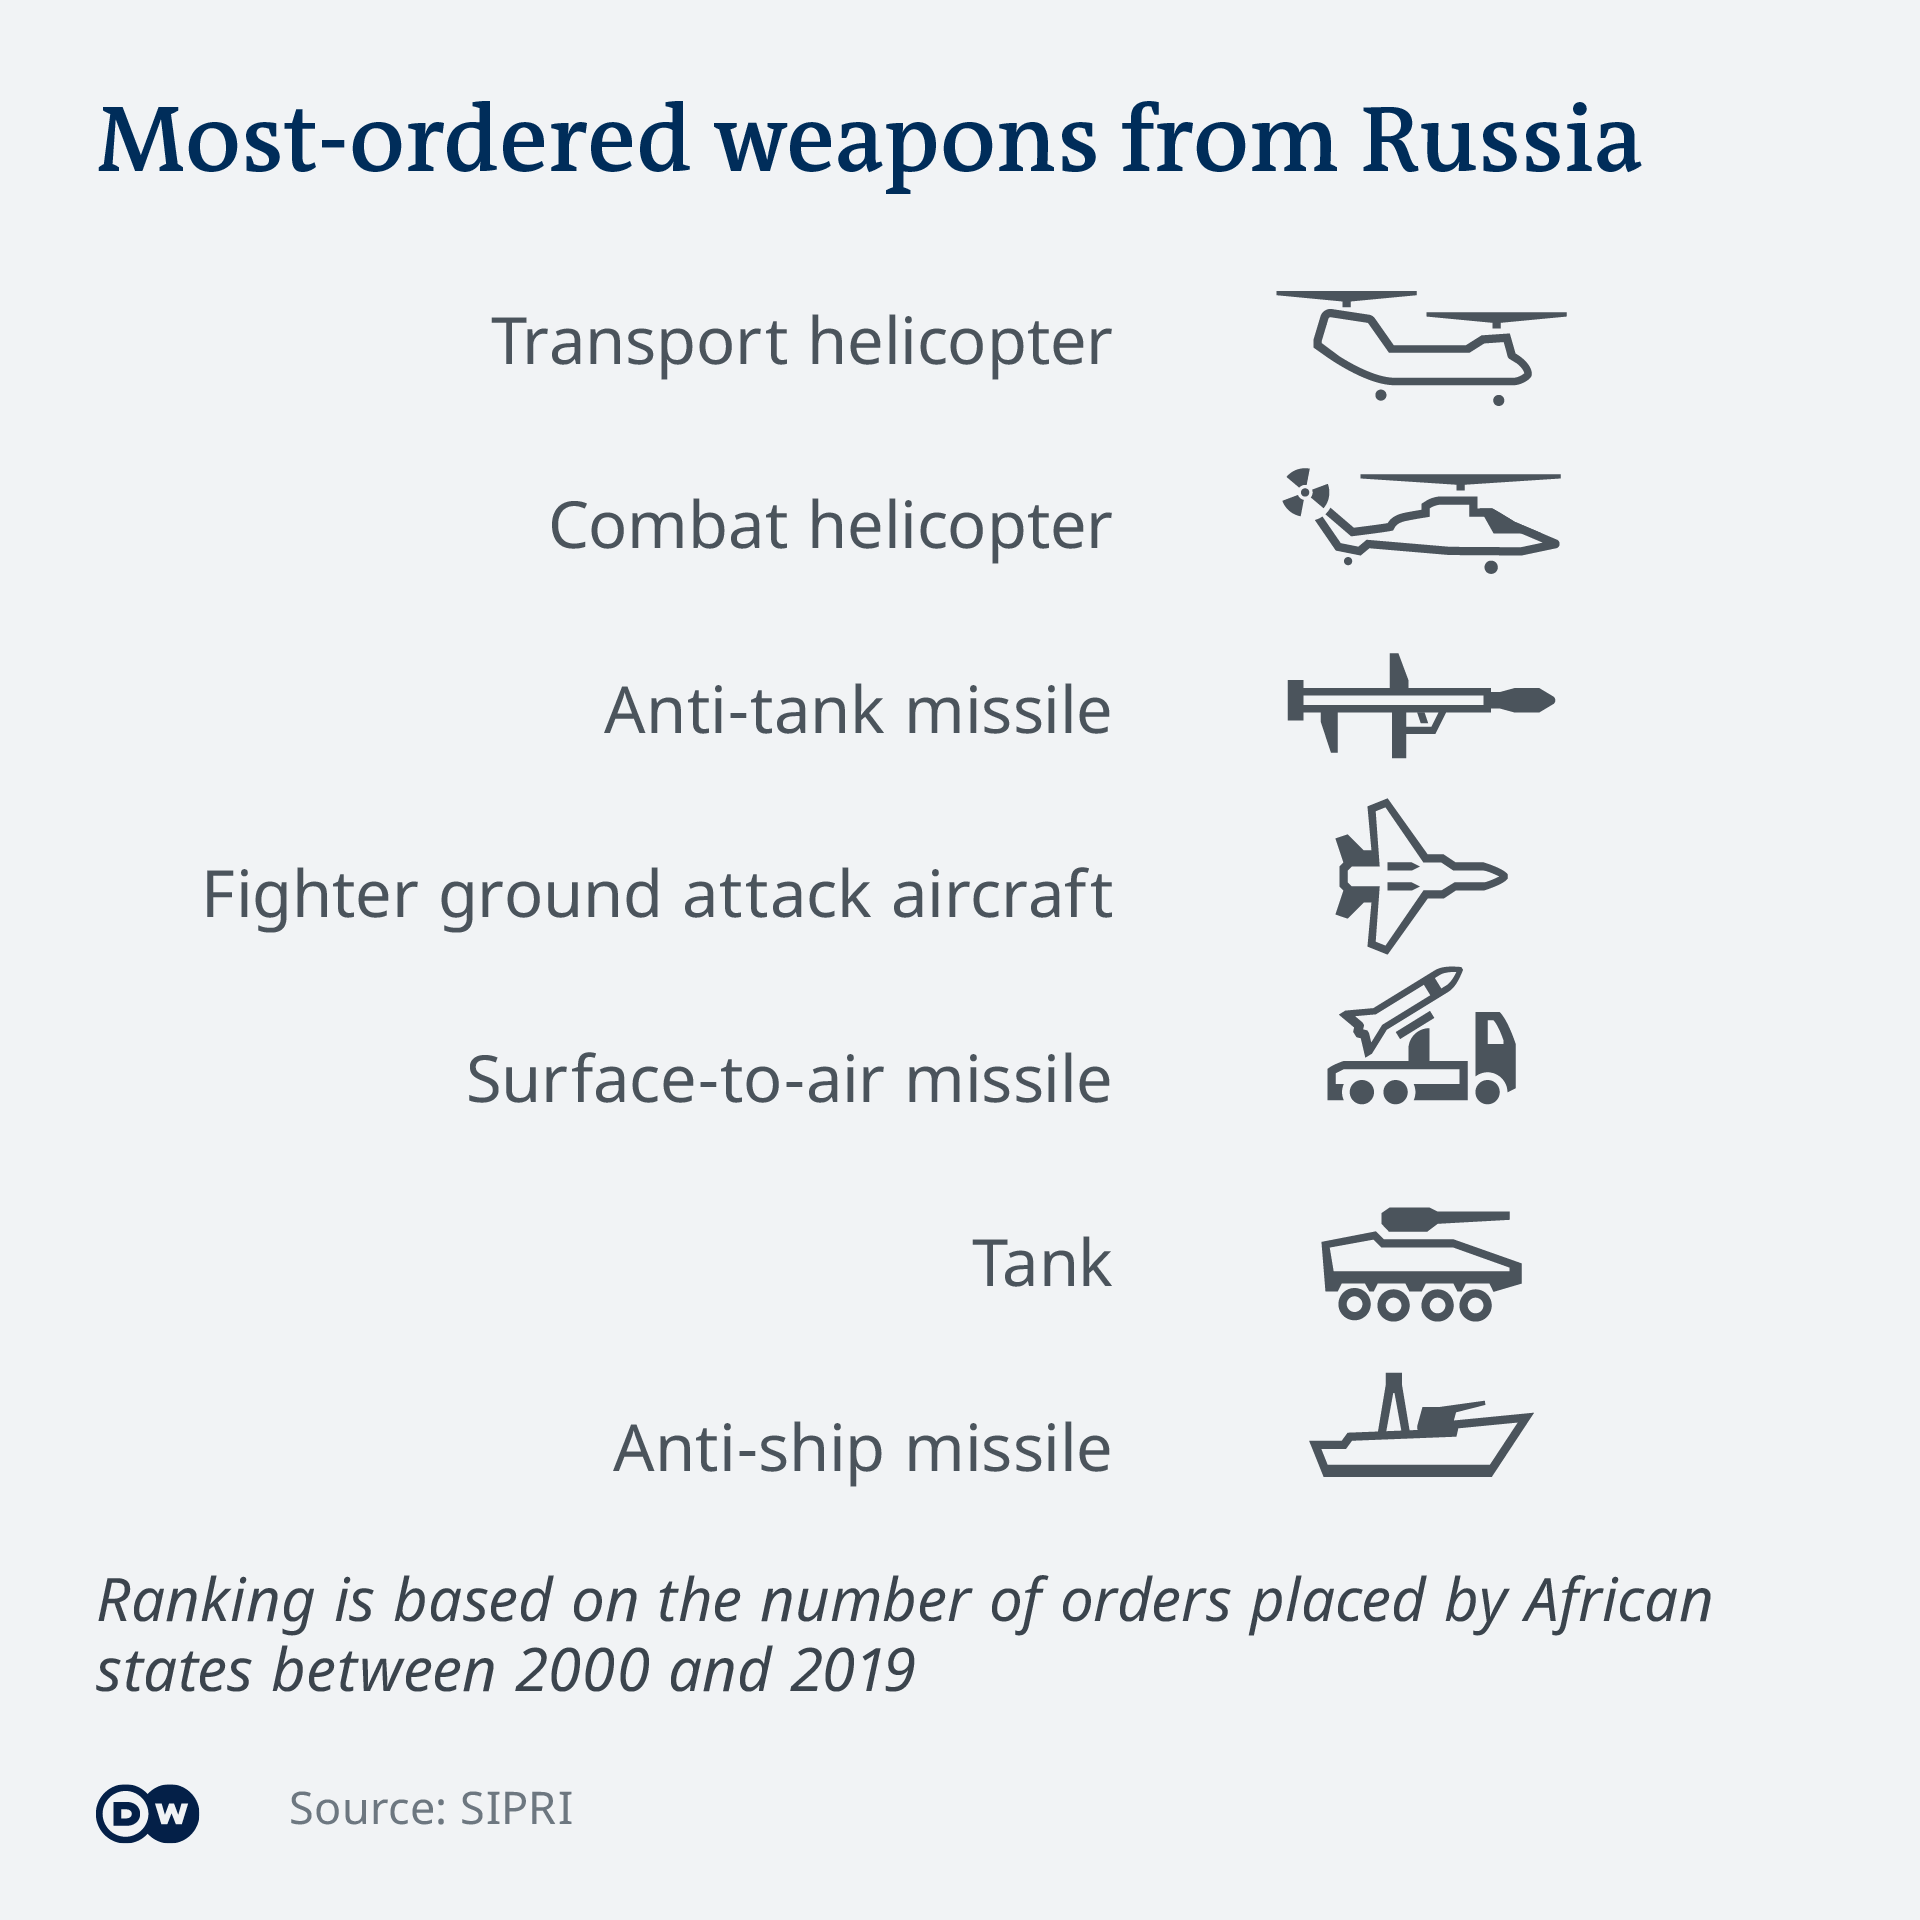 African states' most-ordered weapons from Russia